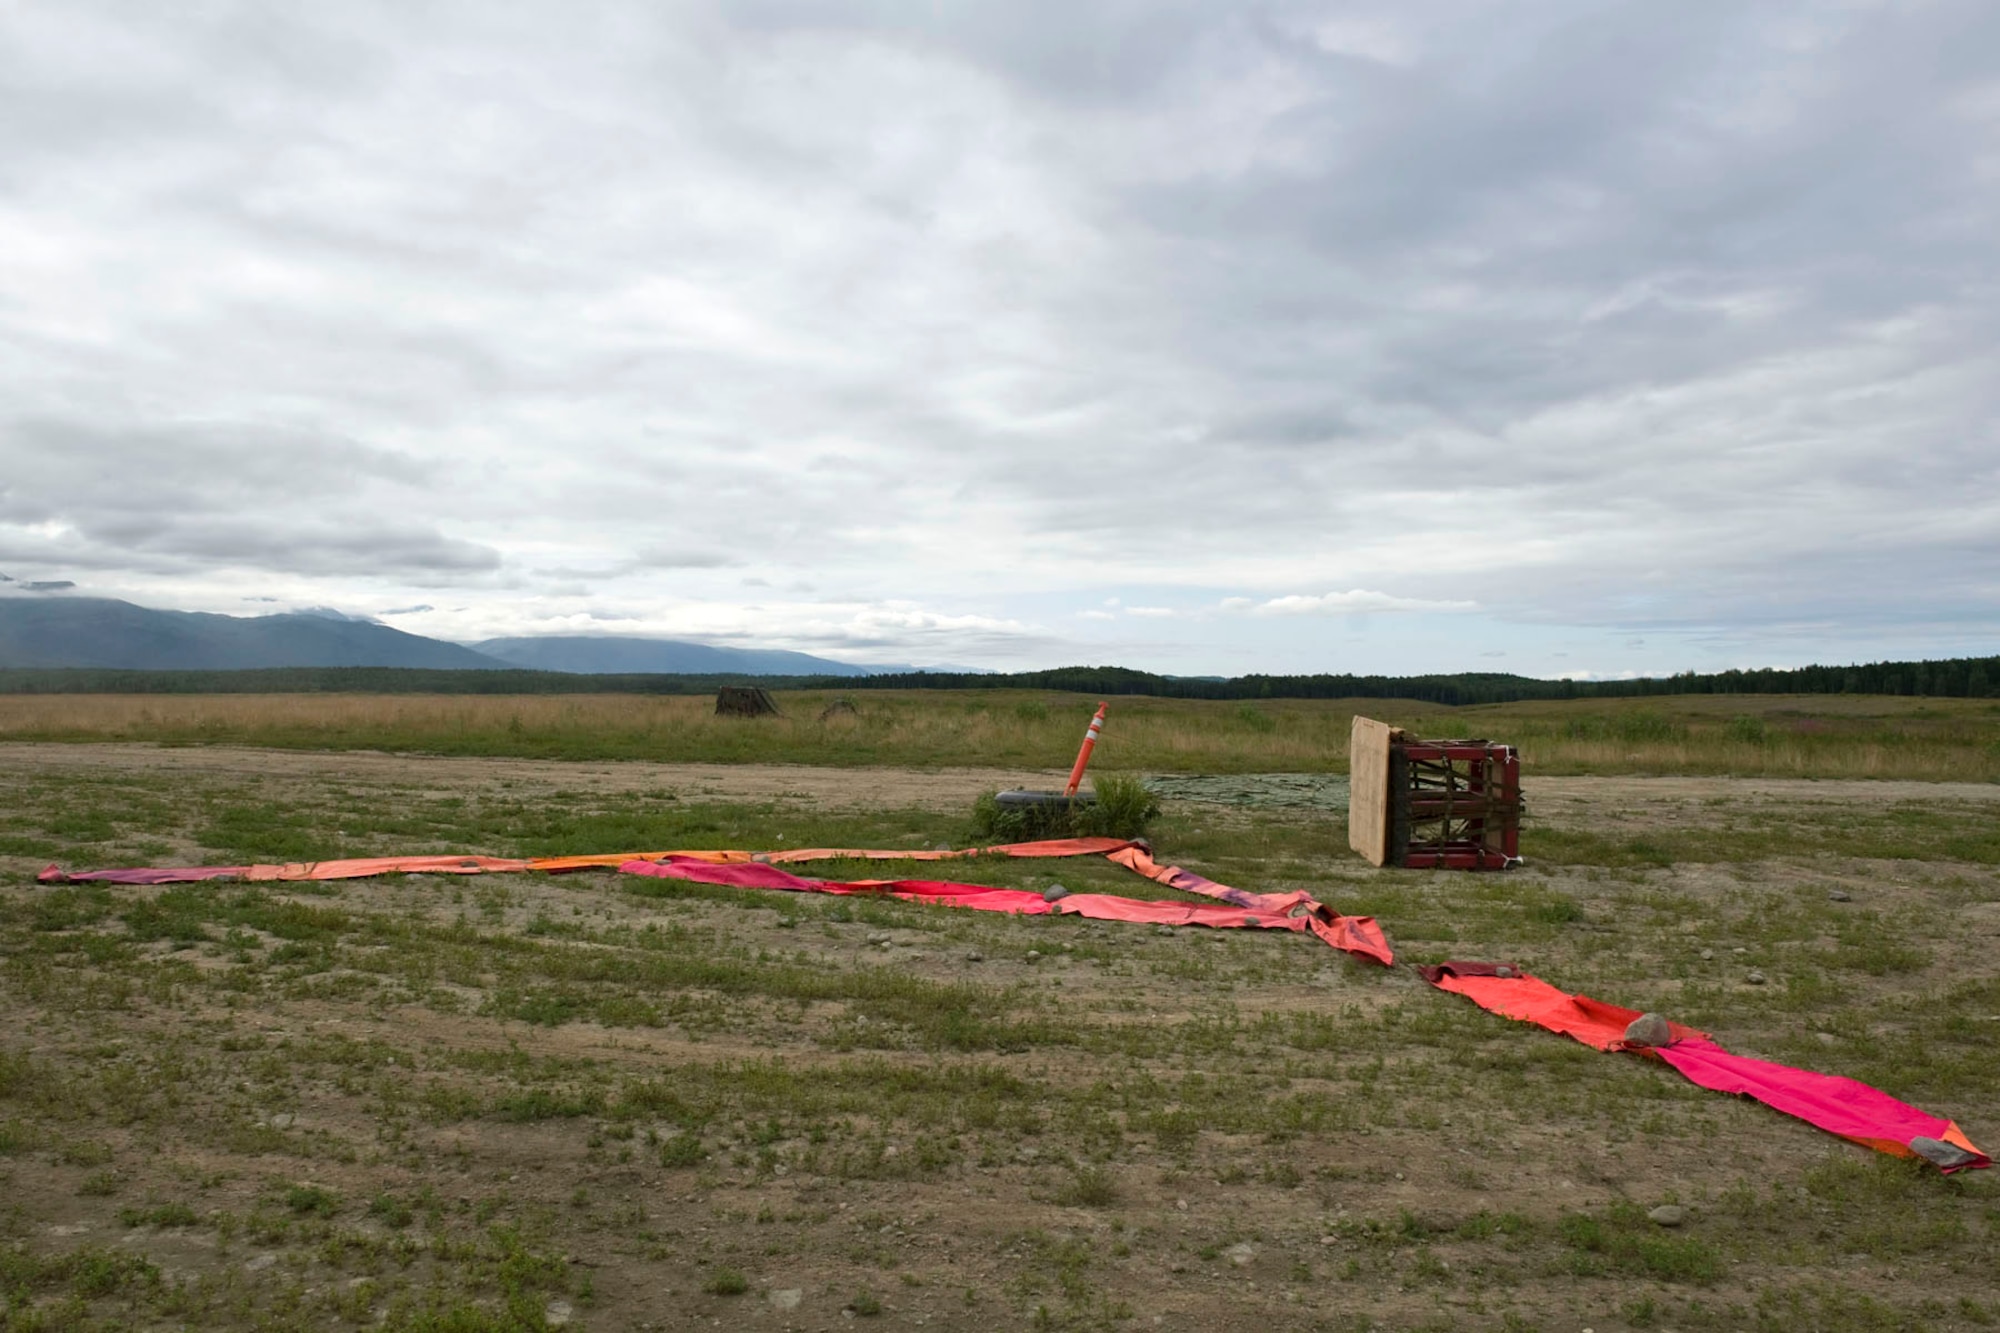 JOINT BASE ELMENDORF-RICHARDSON, Alaska - Two training container delivery systems (CDS) lay next to a target point at the Malamute Drop Zone here Aug. 11, 2012. The CDSs are attached to parachutes and are used in airdrops by military cargo aircraft. During wartime and humanitarian missions, they carry supplies such as food or ammunition to areas that cannot otherwise be reached. These CDSs were used by Alaska Air National Guard's 176th Wing's airlift squadrons participating in a "Moose Shoot" -- an airdrop and landing competition. Also participating were the JBER-based 517th and 537th airlift squadrons of the active-duty Air Force. (National Guard photo by Master Sgt. Shannon Oleson)